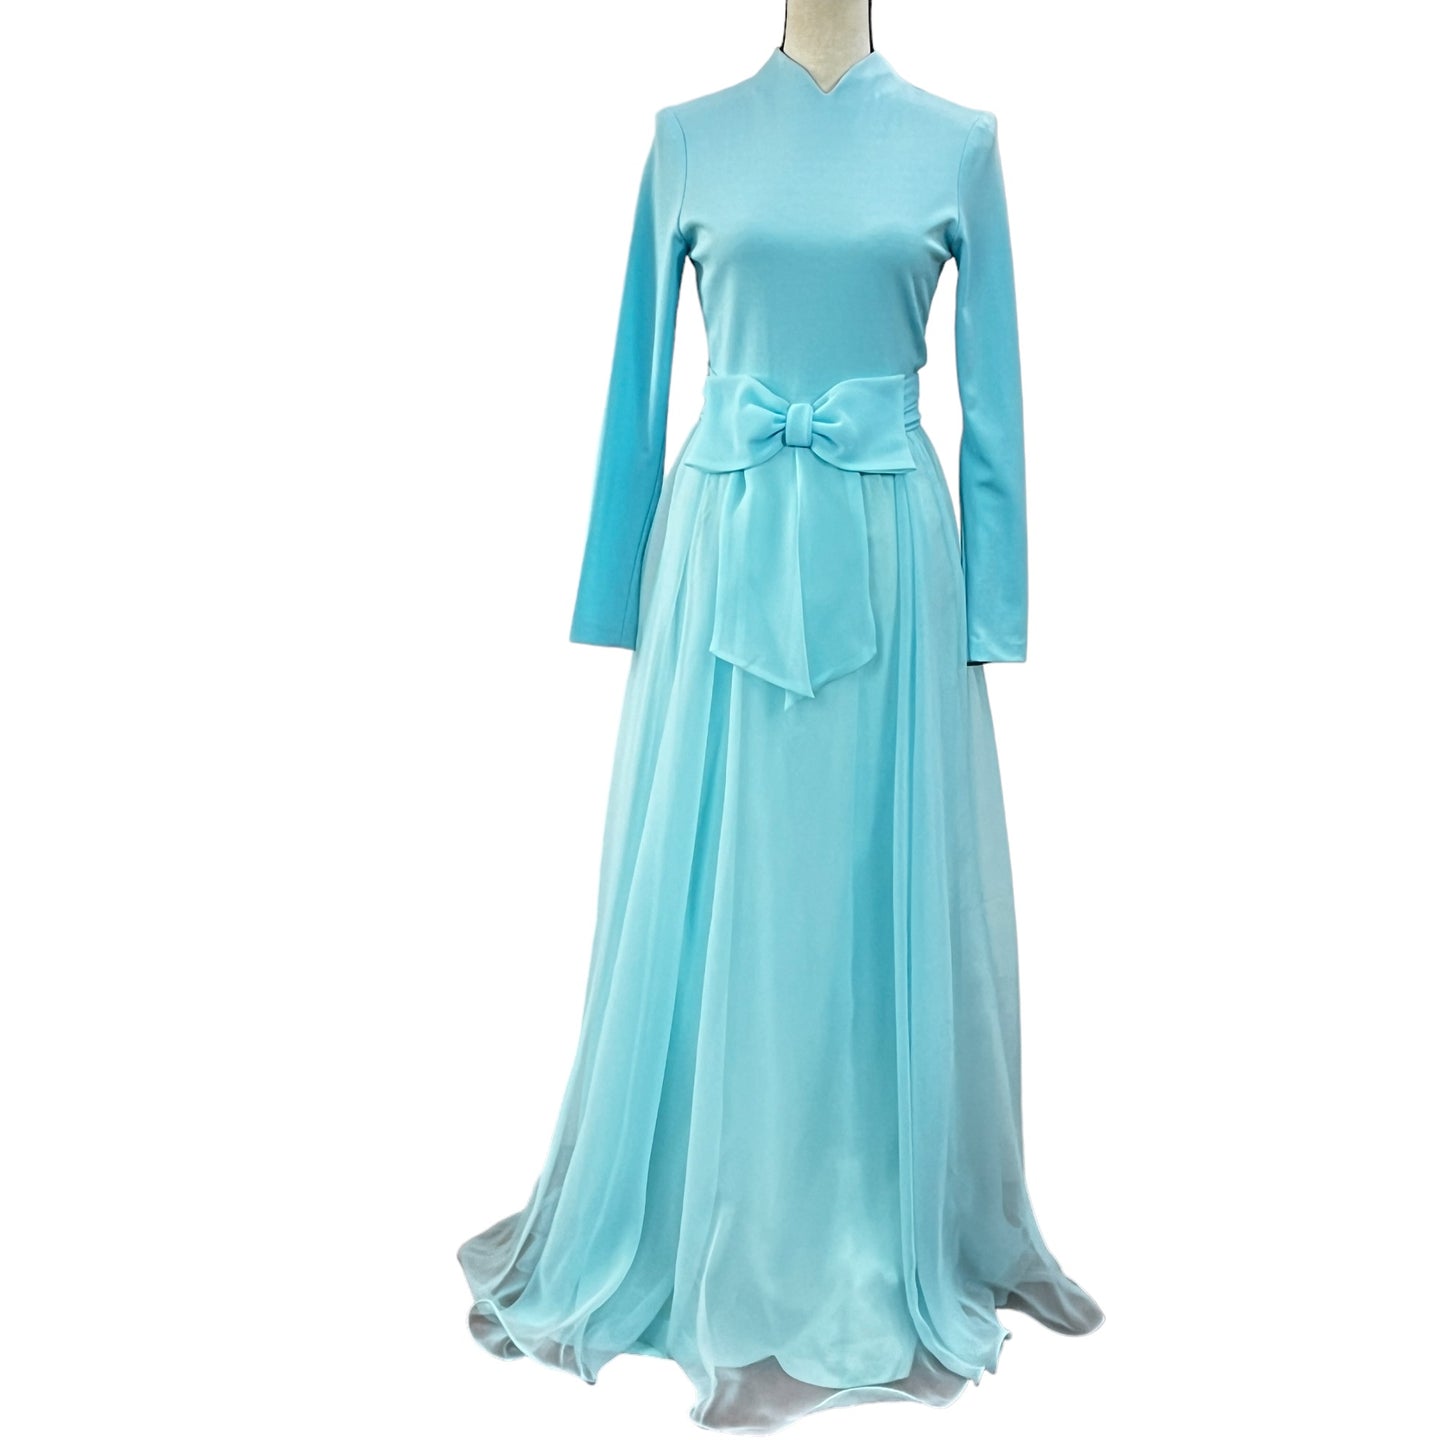 Vintage 60's Turquoise Chiffon Gown Size 32